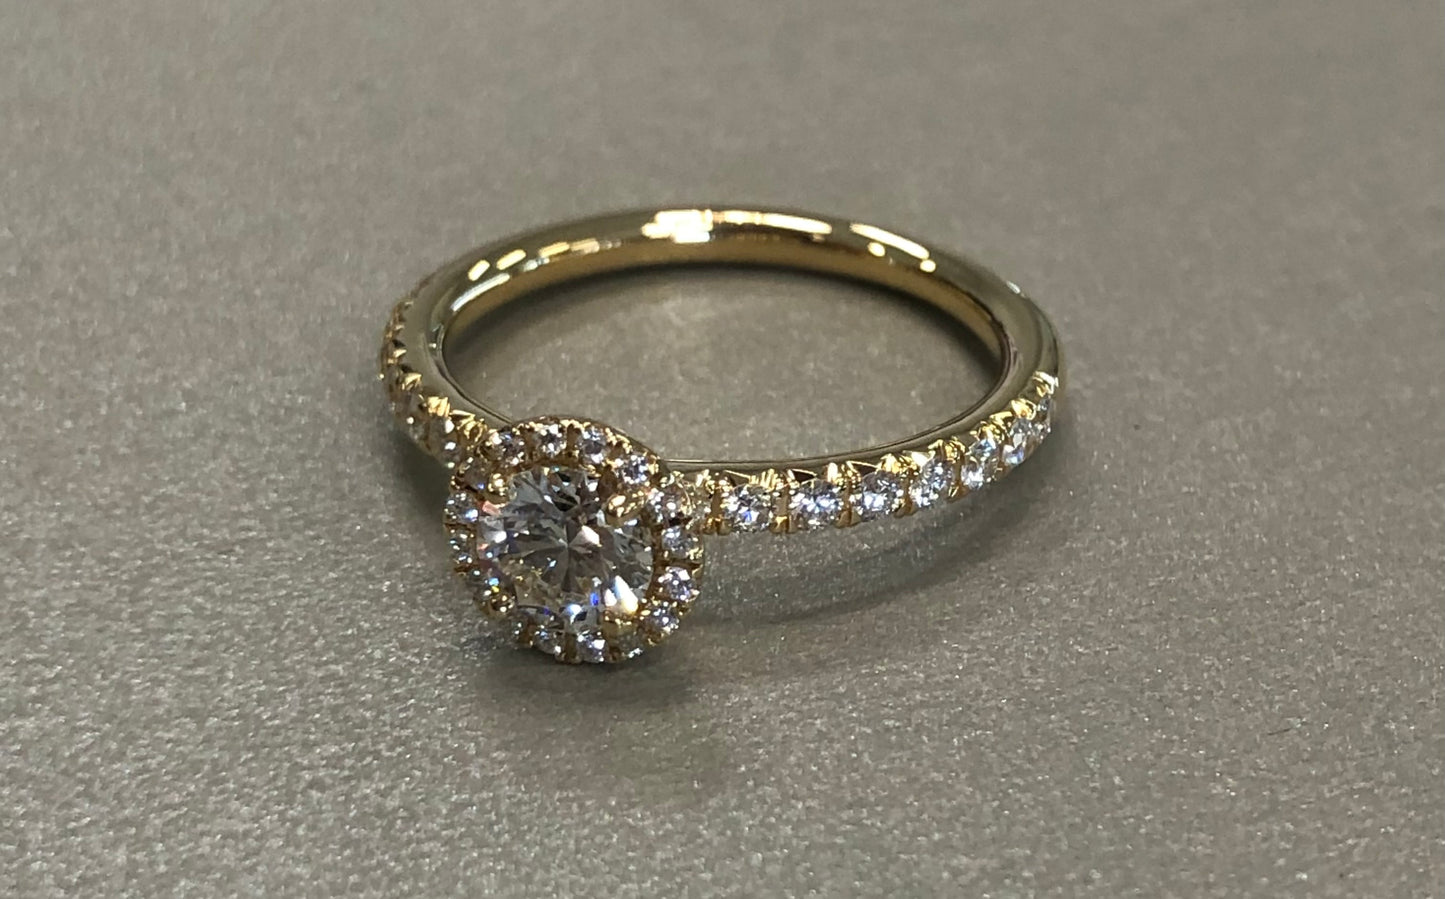 Round Brilliant Cut Natural Diamond with Halo Engagement Ring.